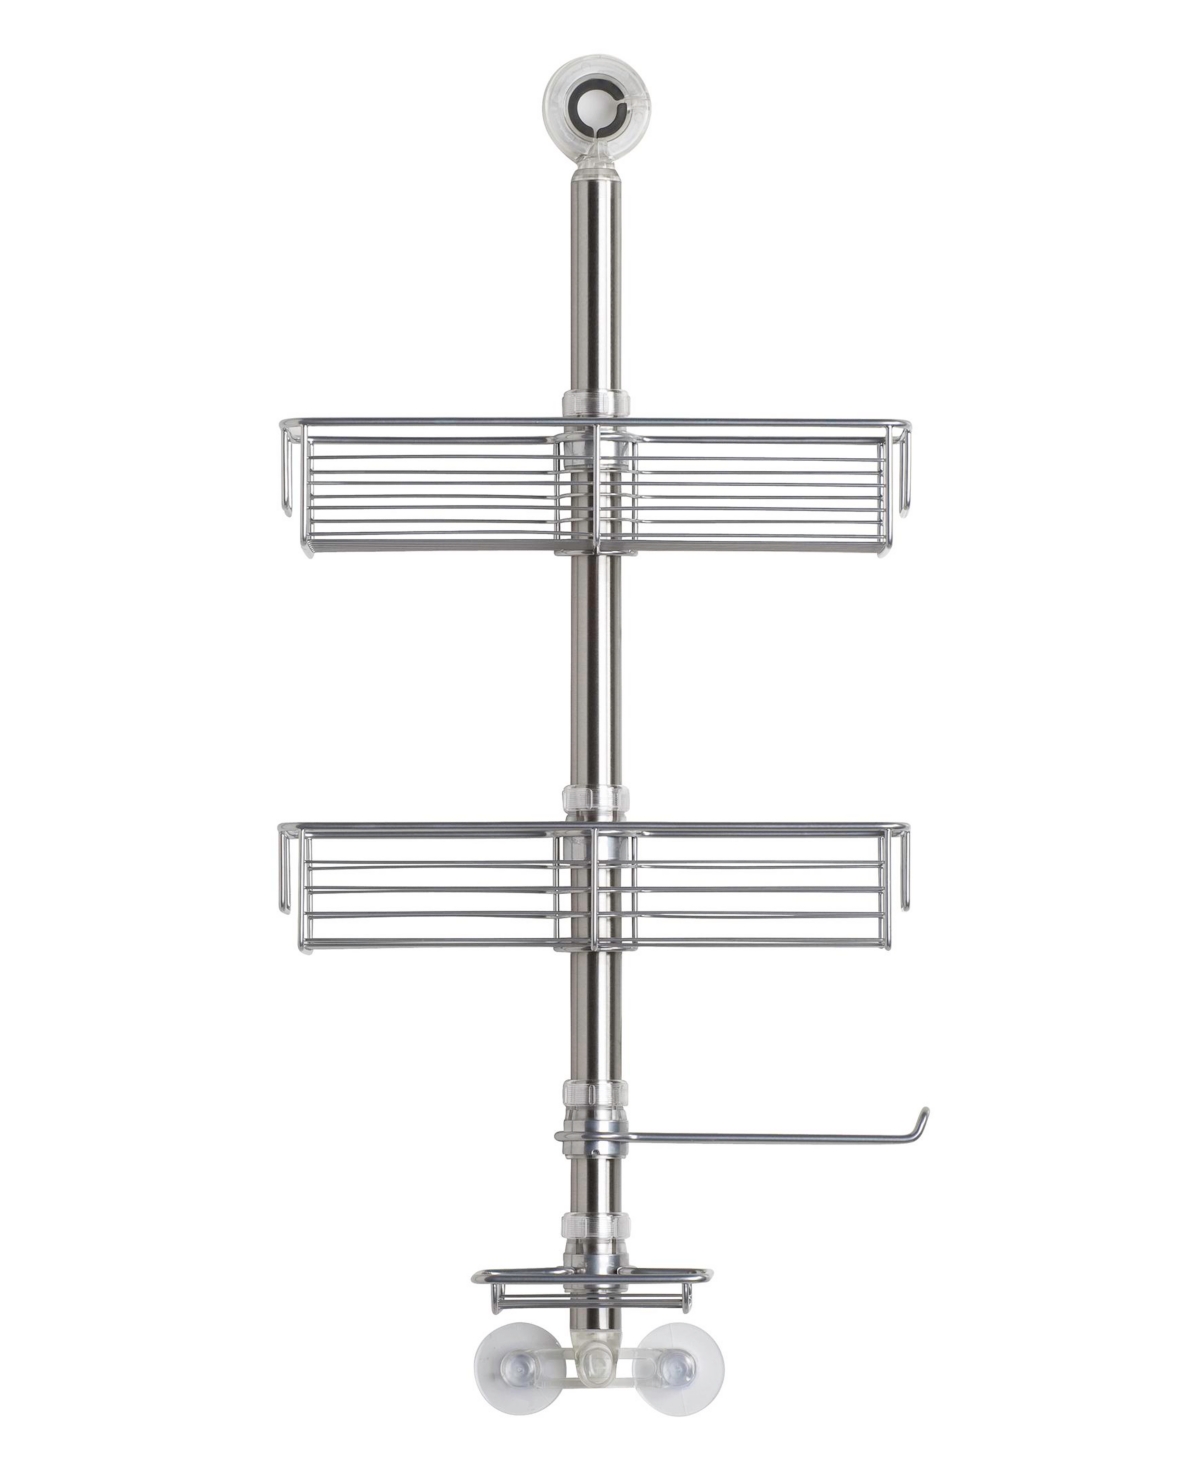 Idesign Forma Bathroom Shower Caddy Station In Brushed Ss